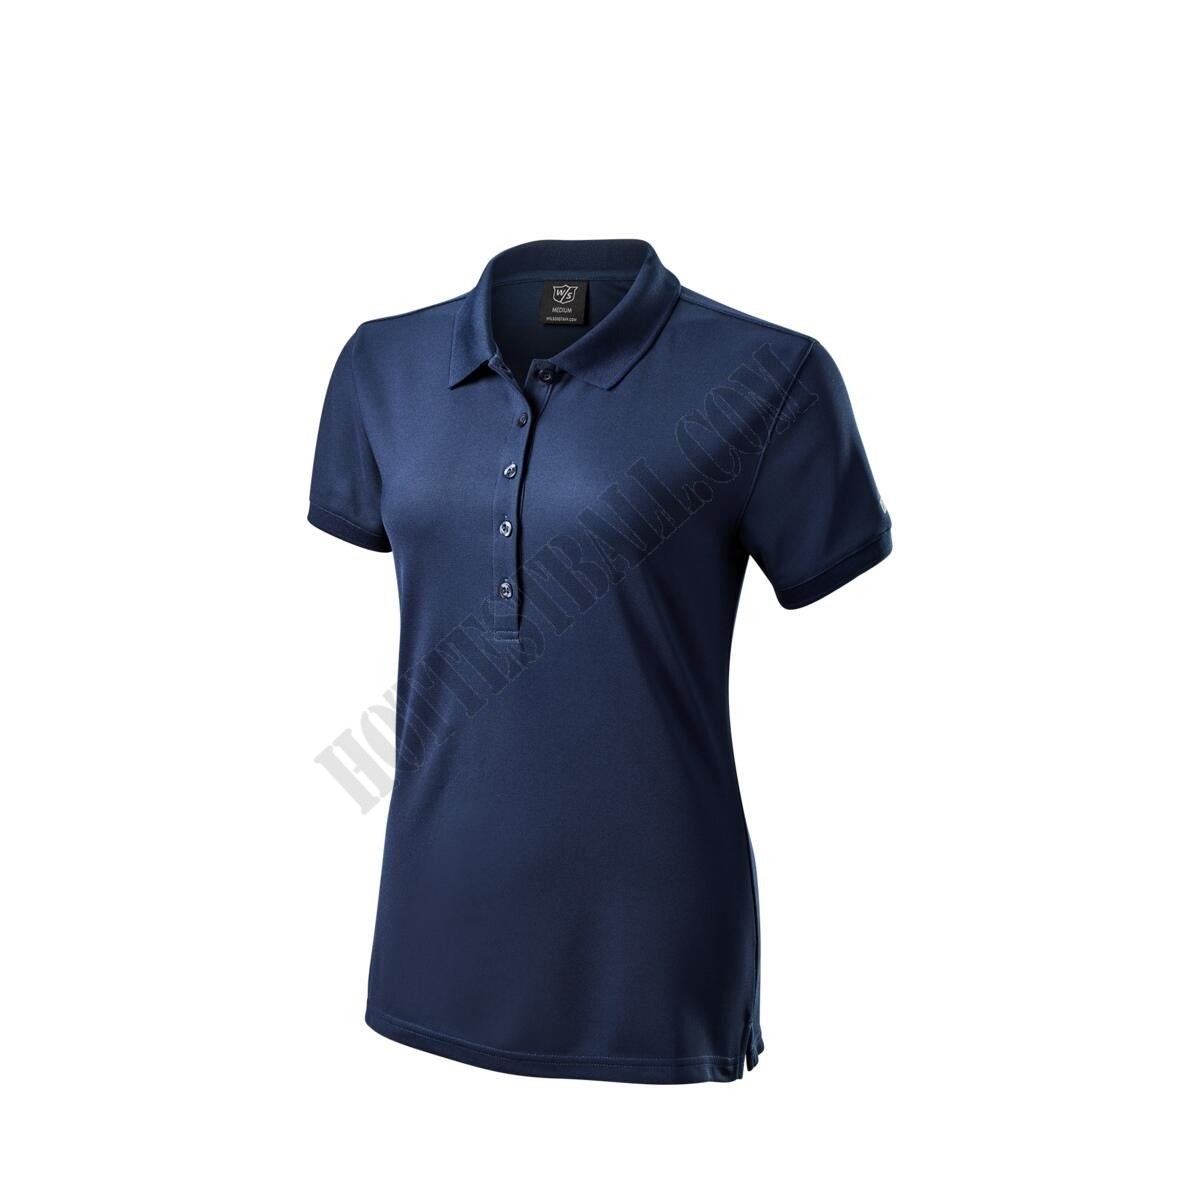 Women's Authentic Polo Shirt - Wilson Discount Store - Women's Authentic Polo Shirt - Wilson Discount Store